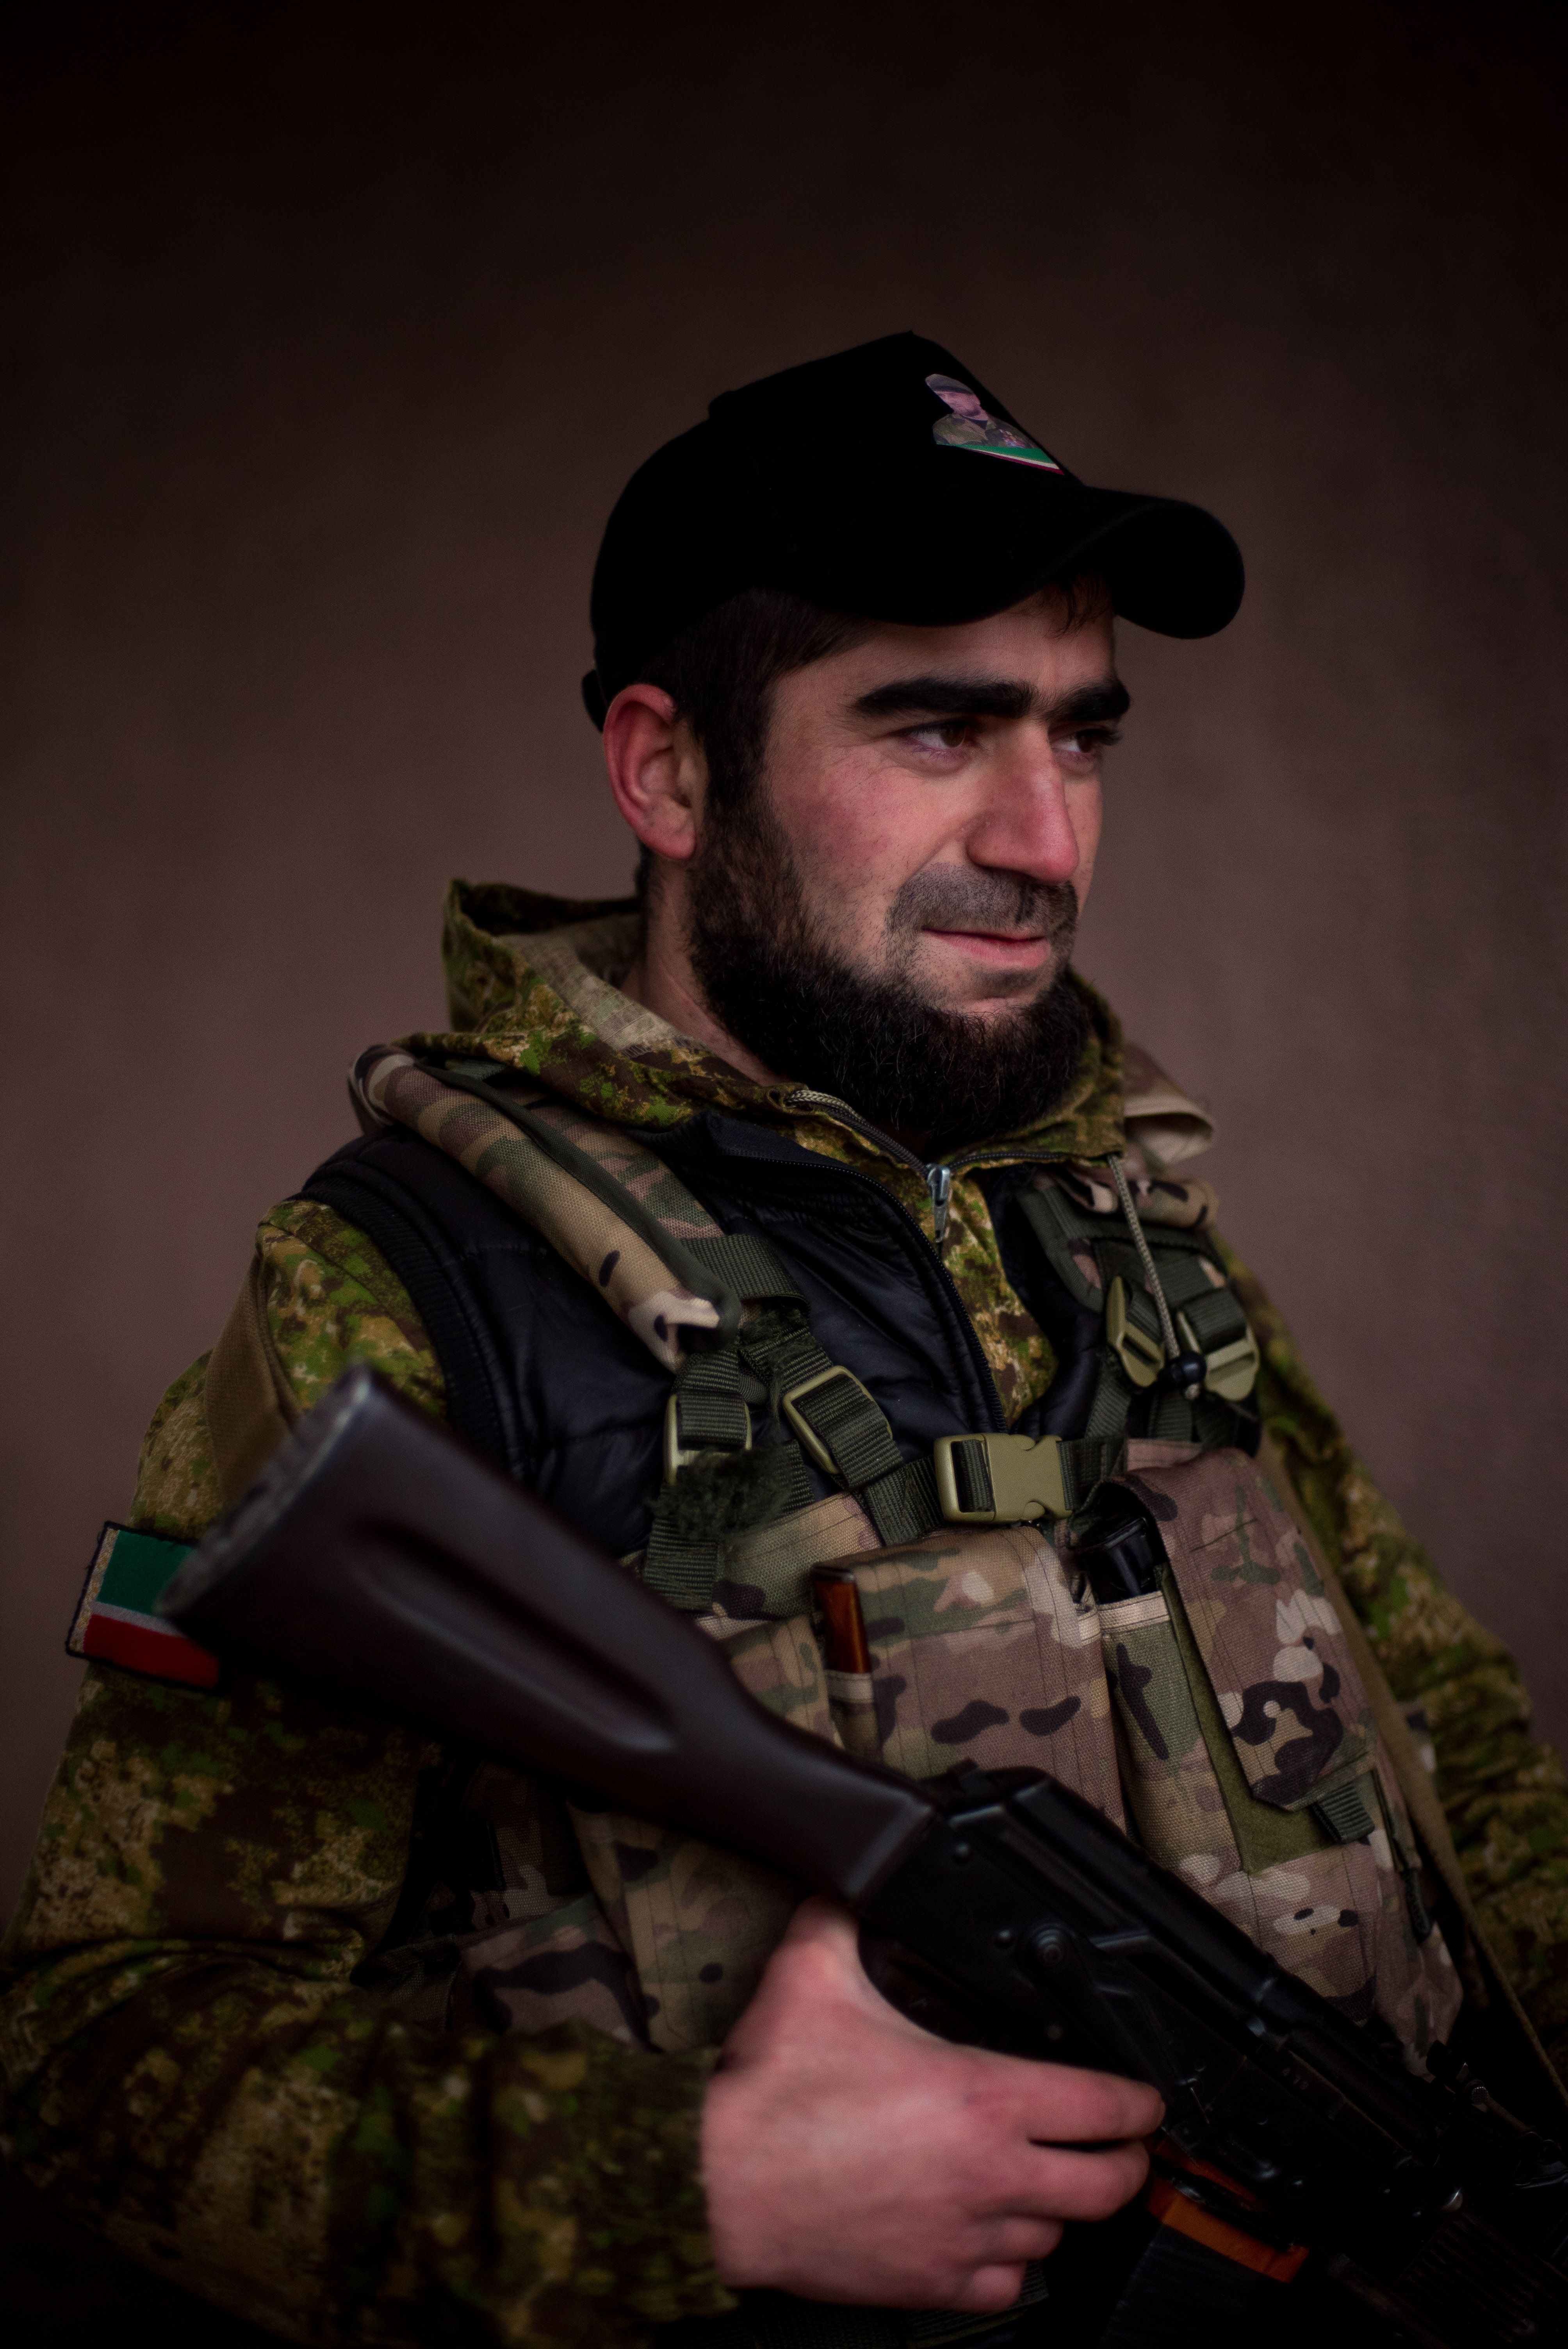 1/26: A Chechen fighter in pro-Russian separatist held Gorlovka. Note the Chechnya flag on his arm and picture on the baseball cap of the Head of the Chechen Republic, Ramzan Kadyrov. (Photo Credit: James Sprankle)